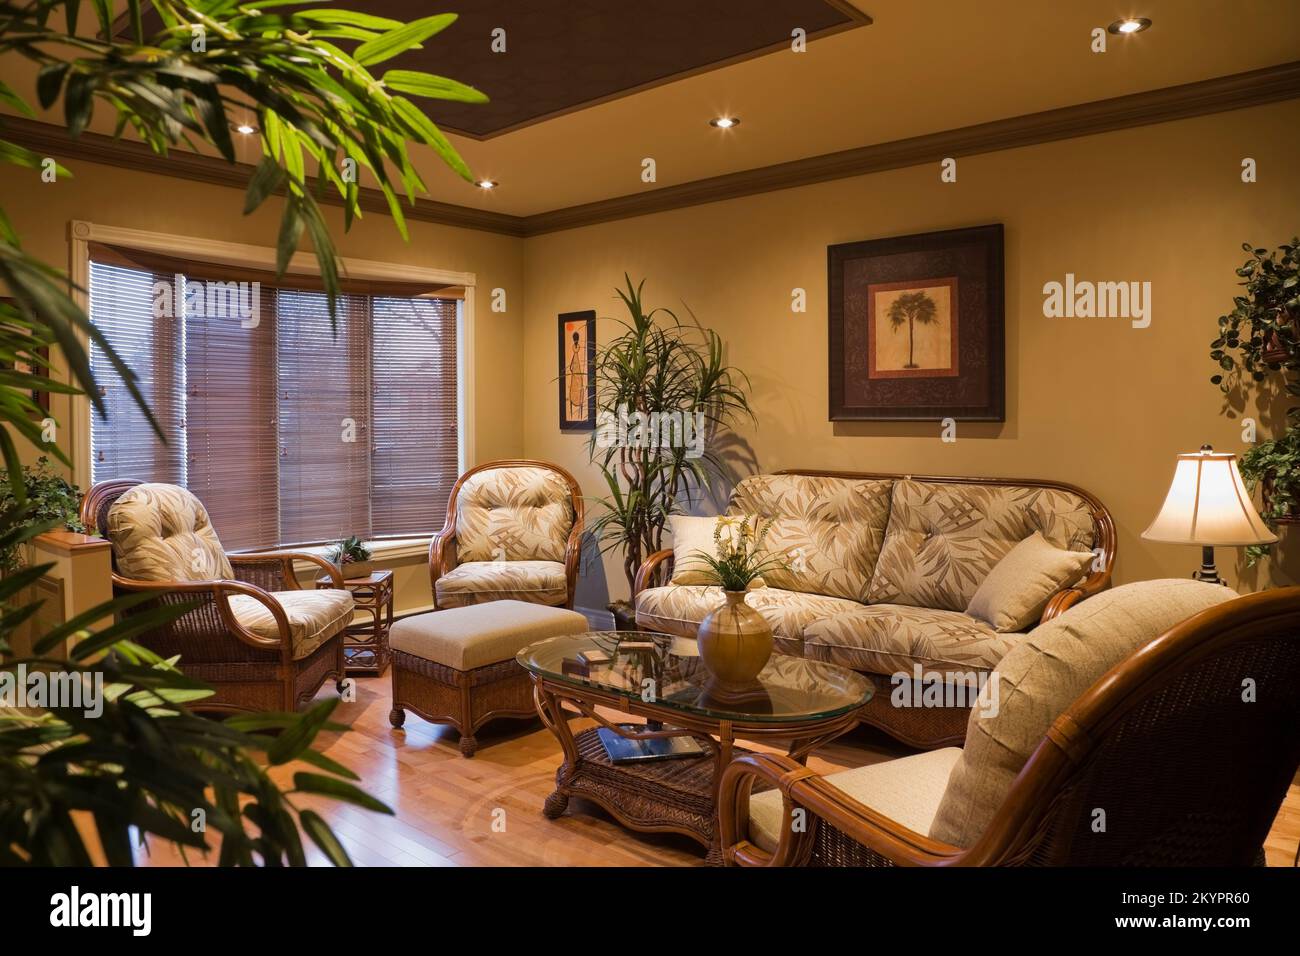 Wicker armchairs, sofa and glass top coffee table in living room inside small bungalow style home, Quebec, Canada. This image is property released. PR Stock Photo